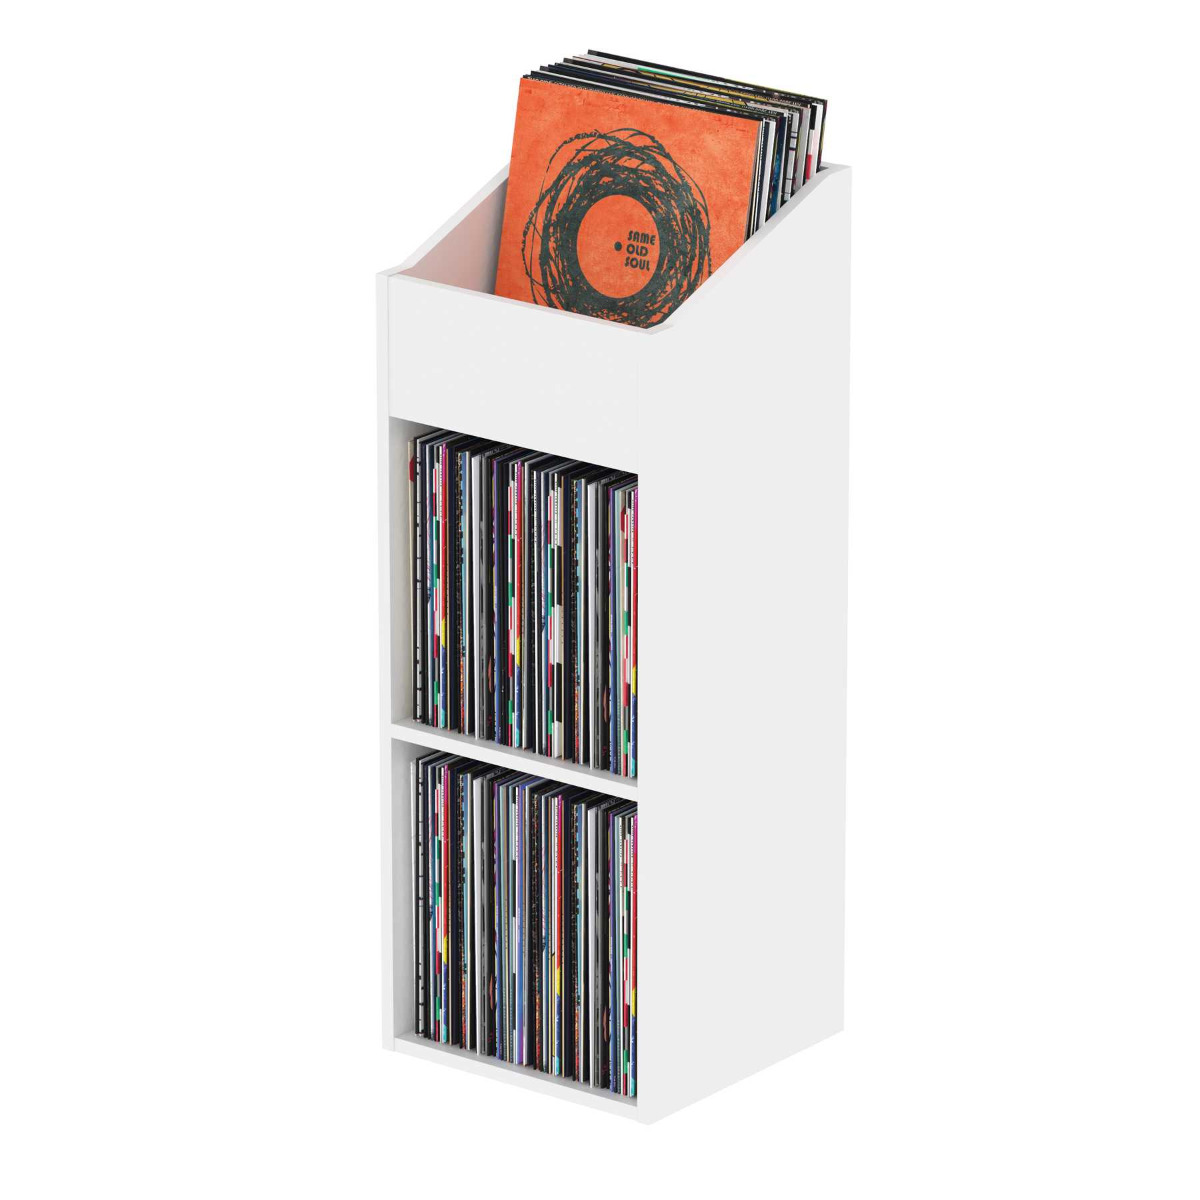 Glorious Record Rack 330 white / Furniture for DJs, Producers and